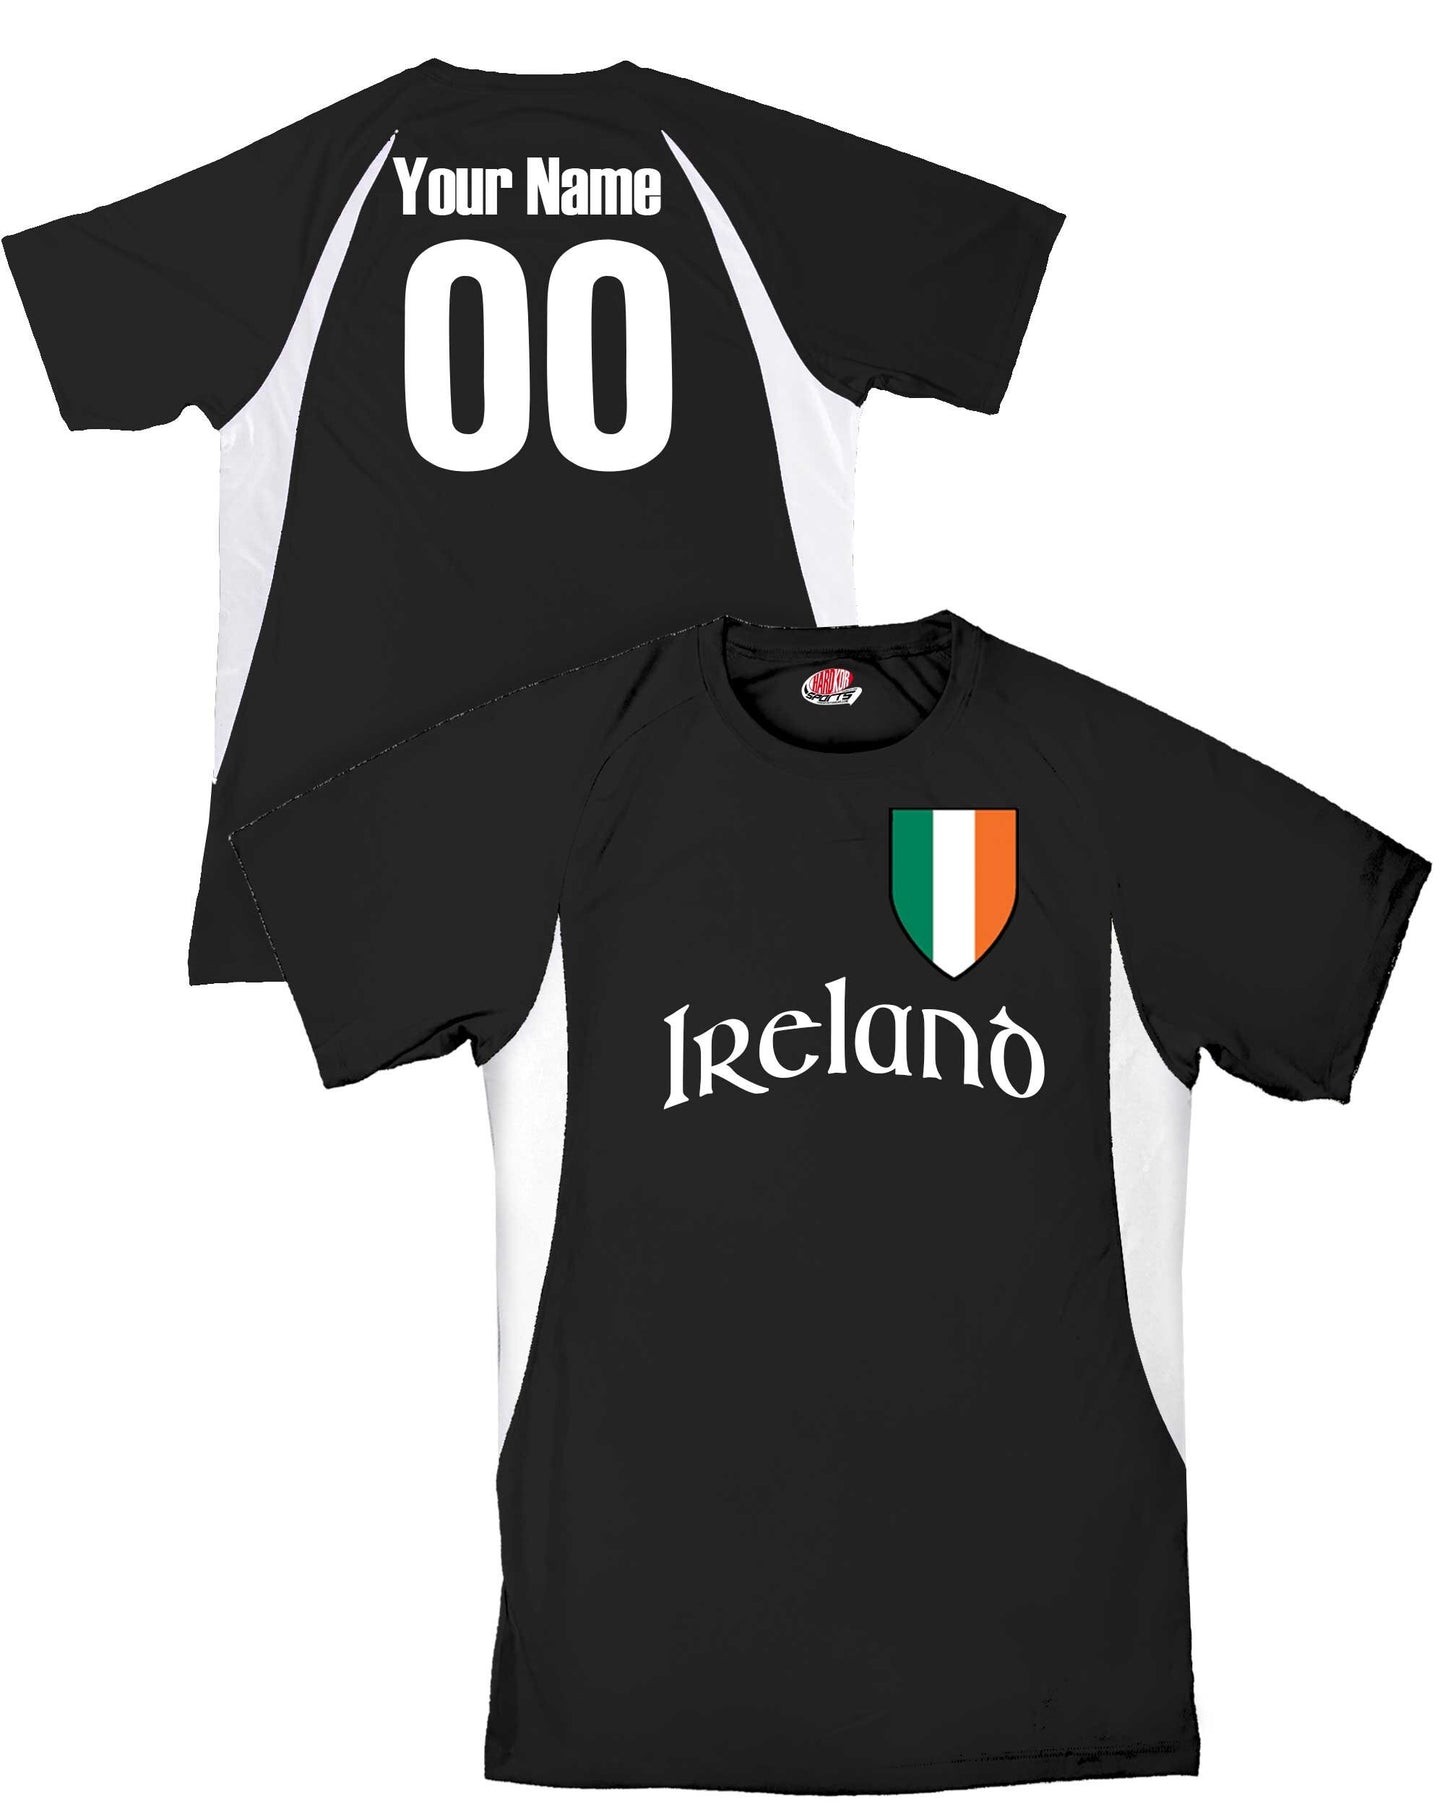 Custom Ireland Soccer Jersey with Irish Flag Shield Design | Personalized with Your Name and Number in Your choice of colors